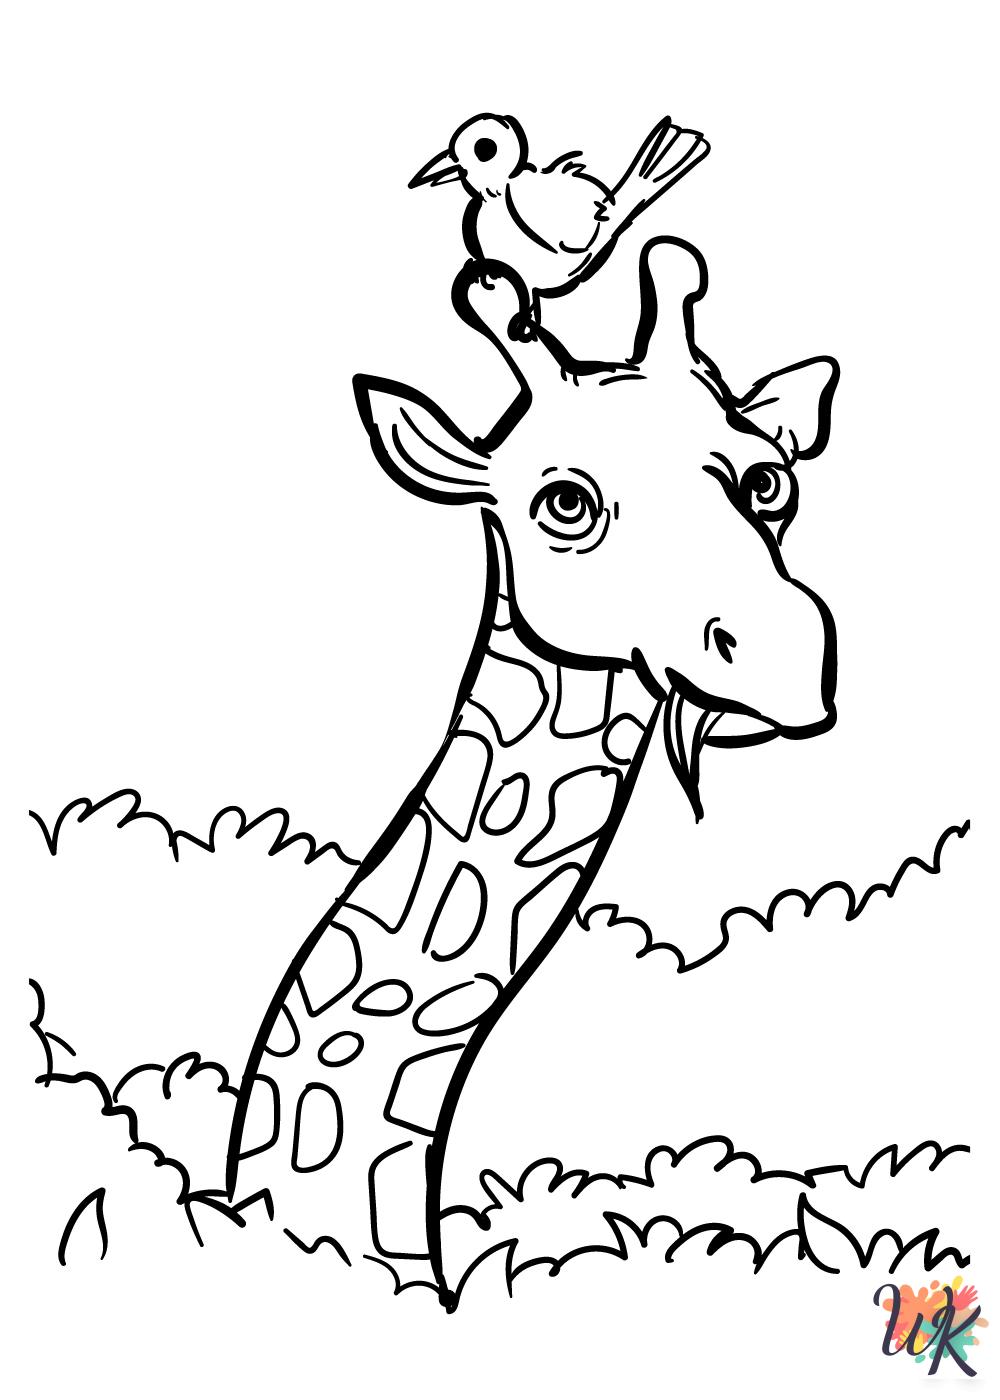 Giraffe coloring book pages